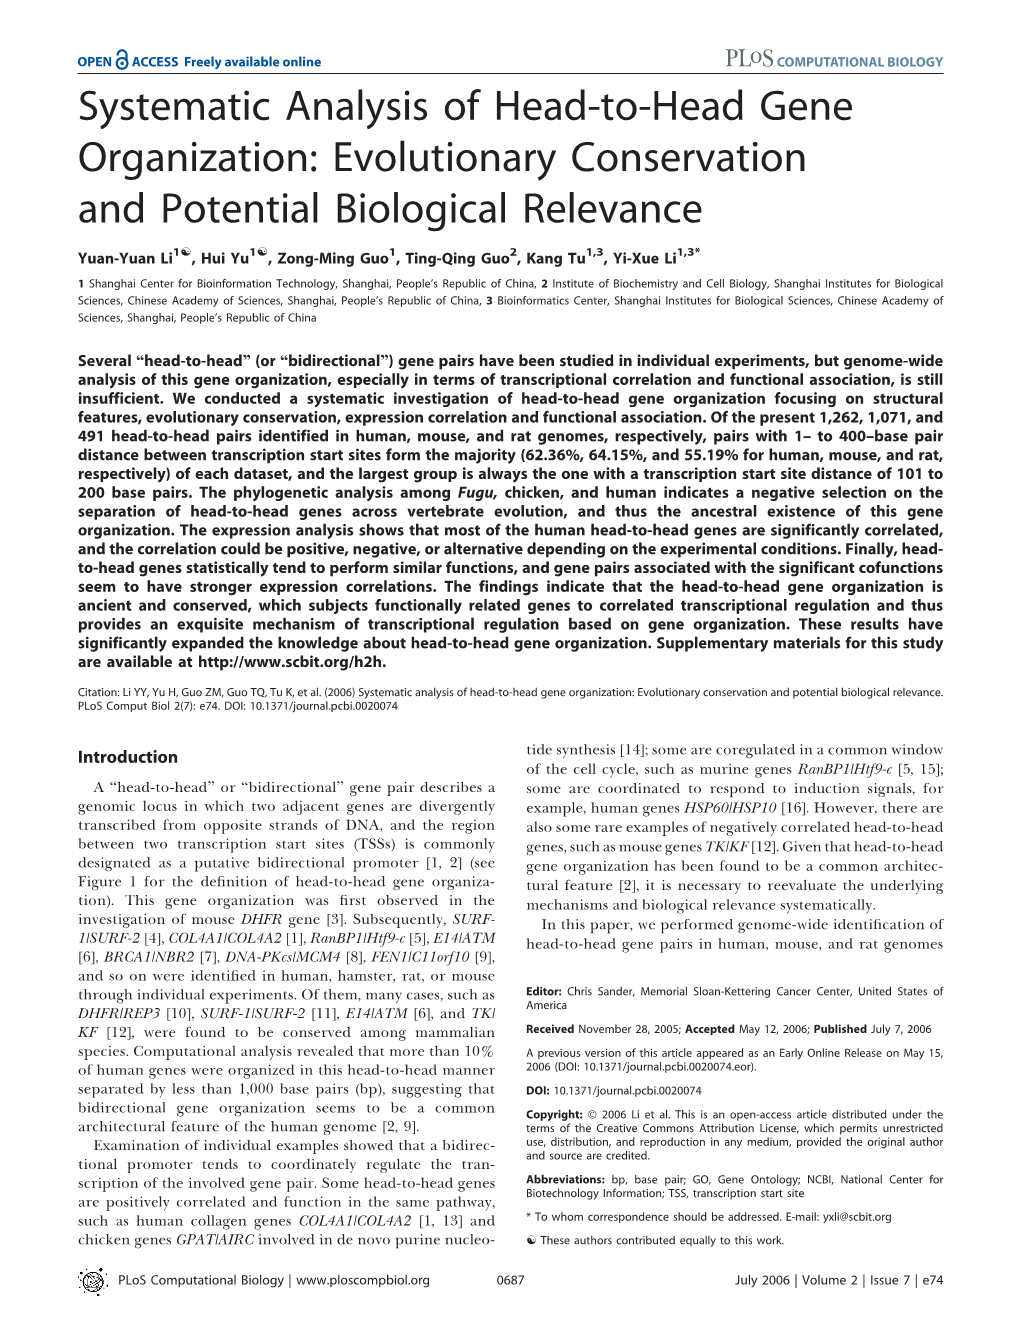 Systematic Analysis of Head-To-Head Gene Organization: Evolutionary Conservation and Potential Biological Relevance